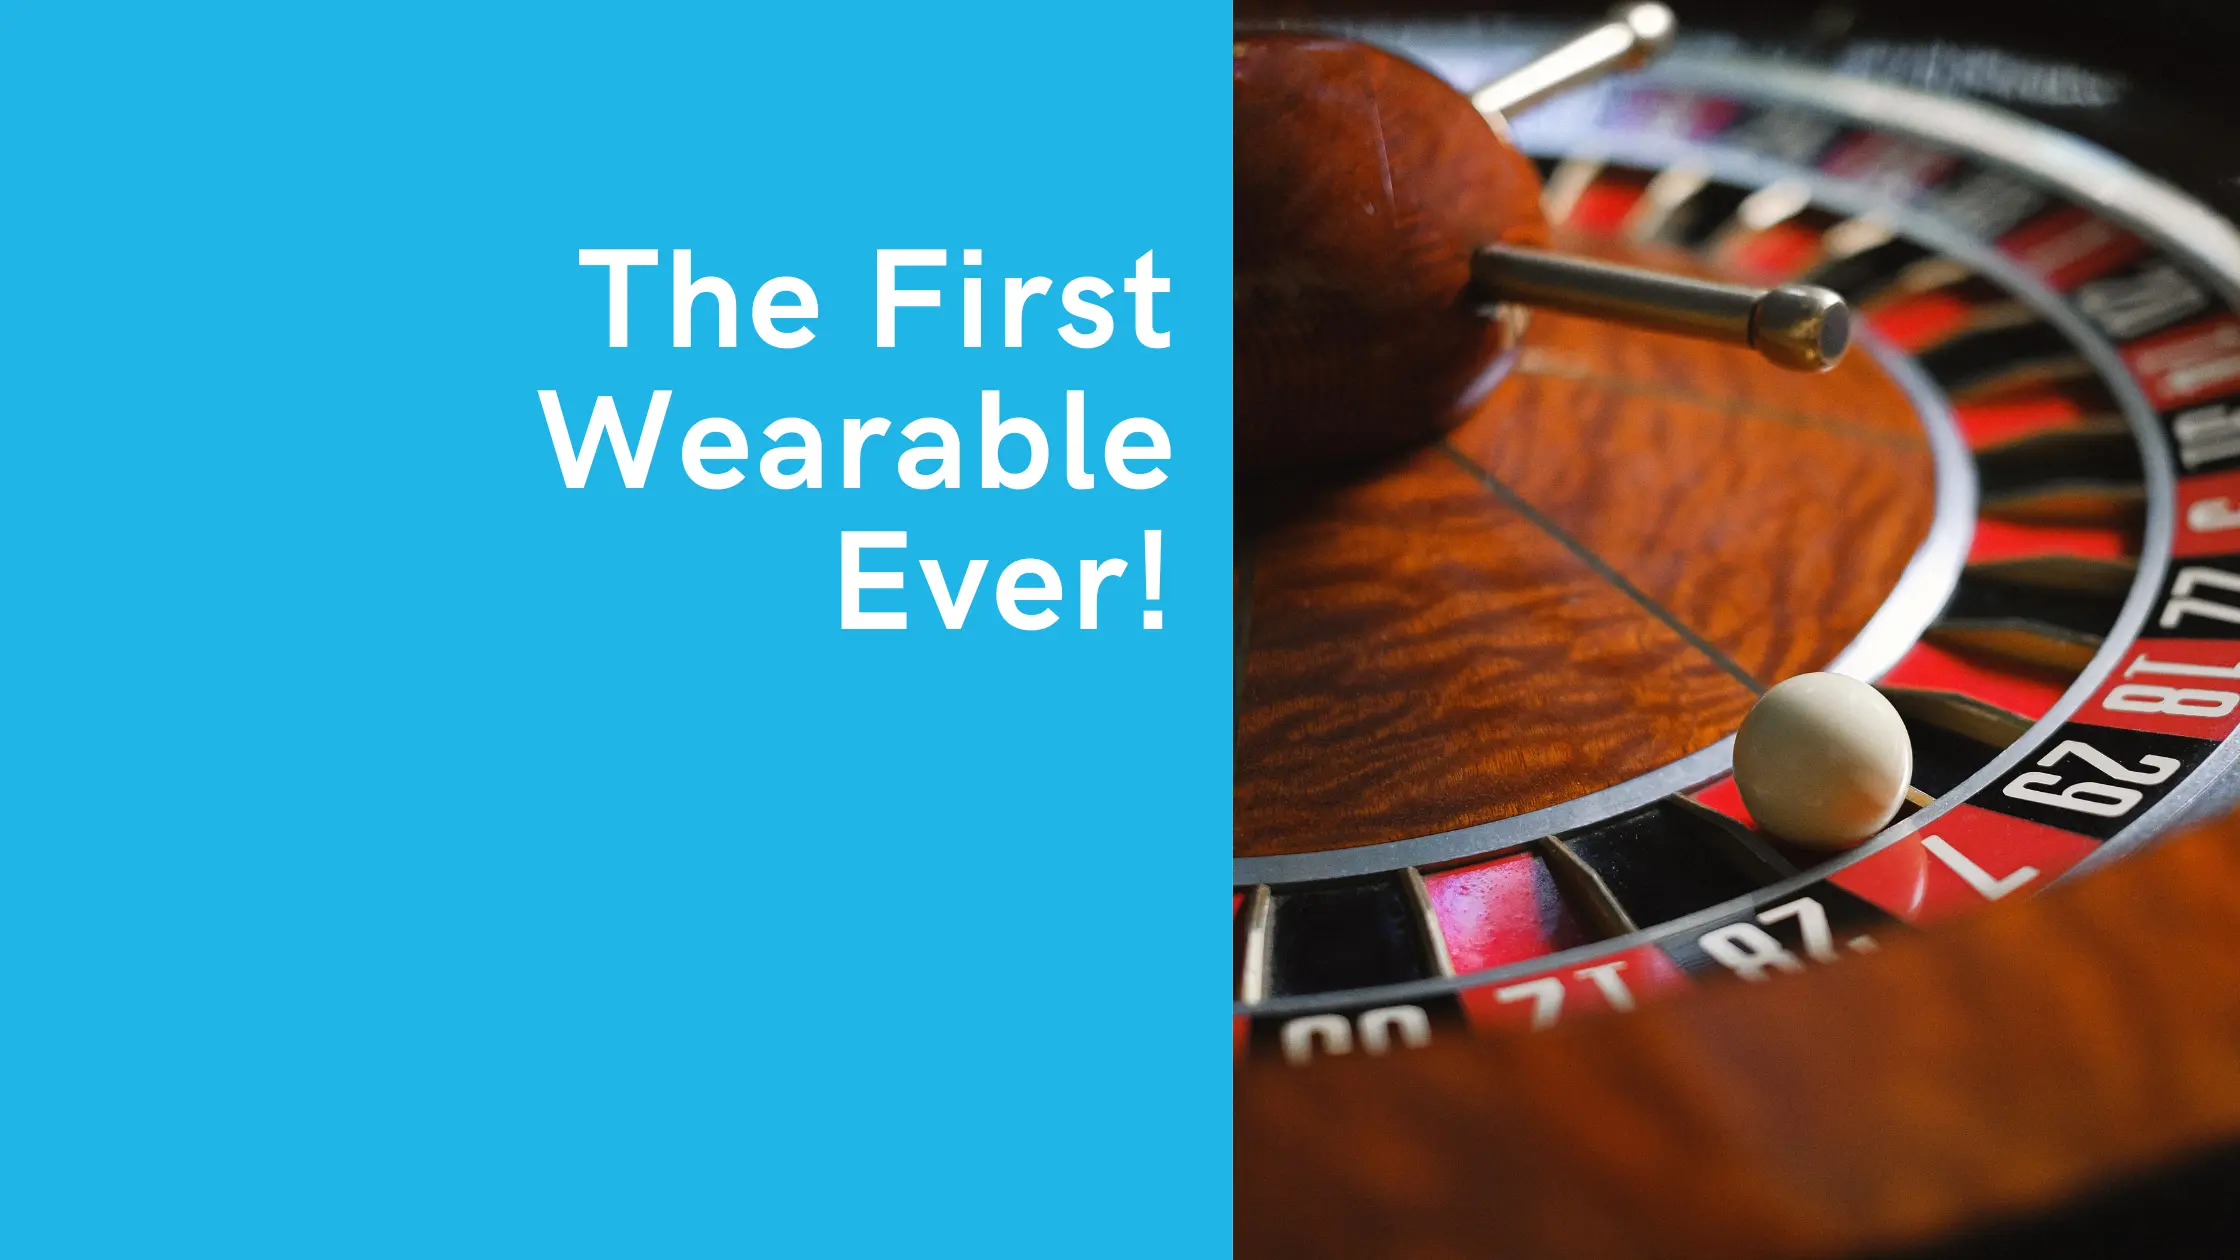 The First Wearable Ever!